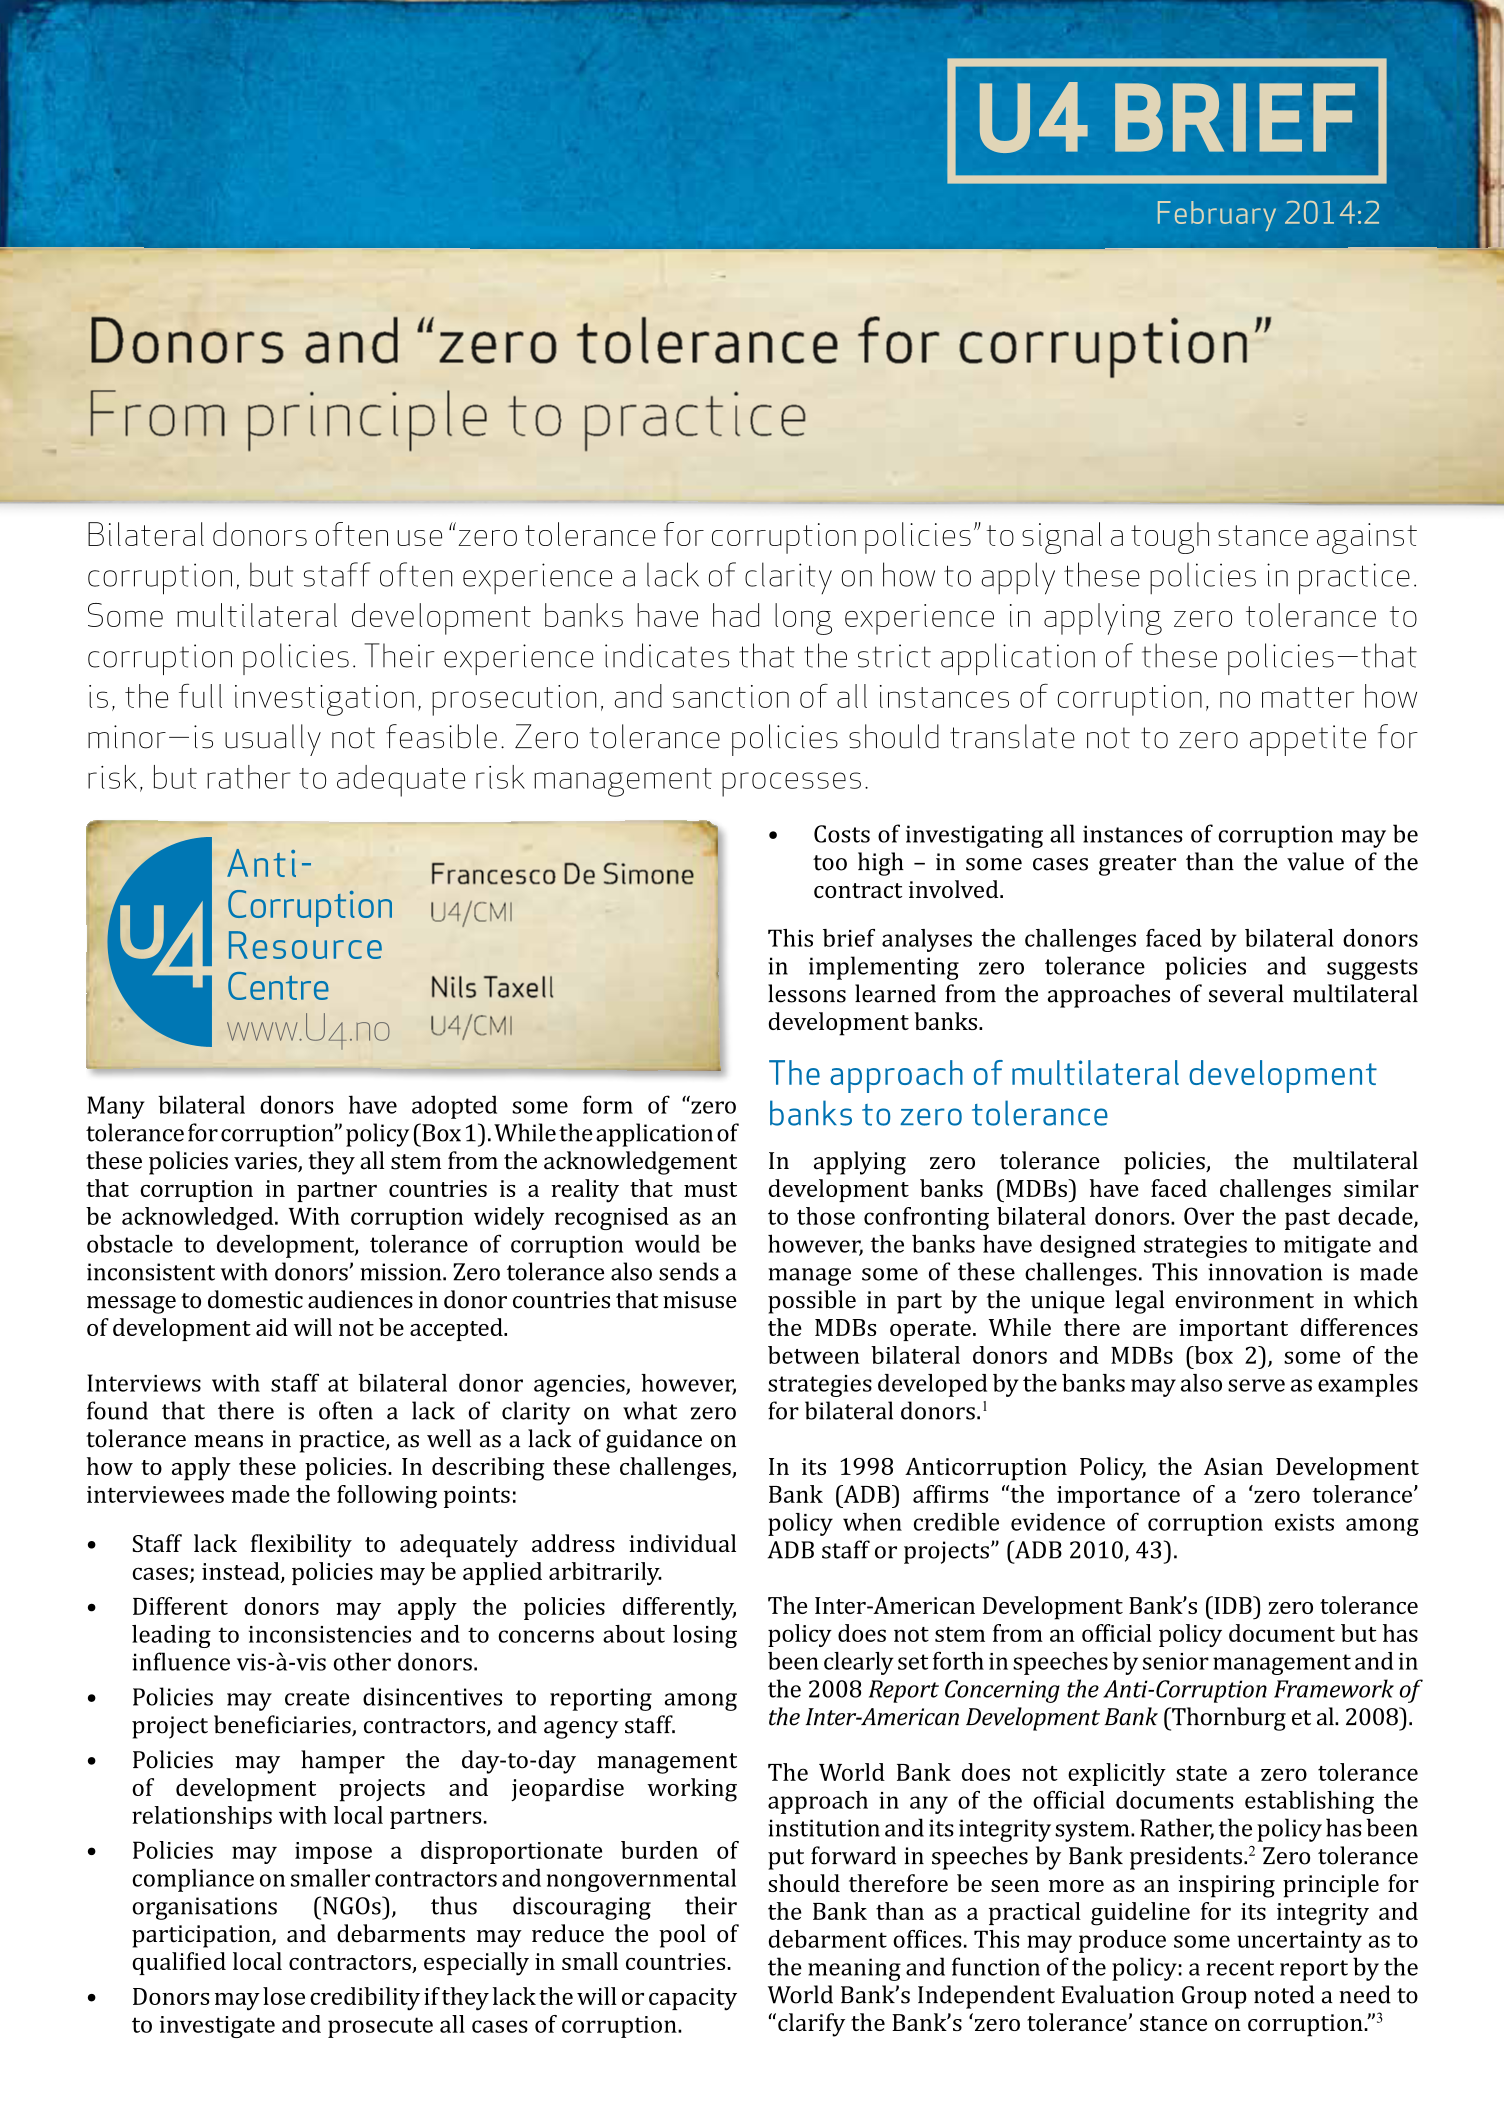 Donors and "zero tolerance for corruption": From principle to practice